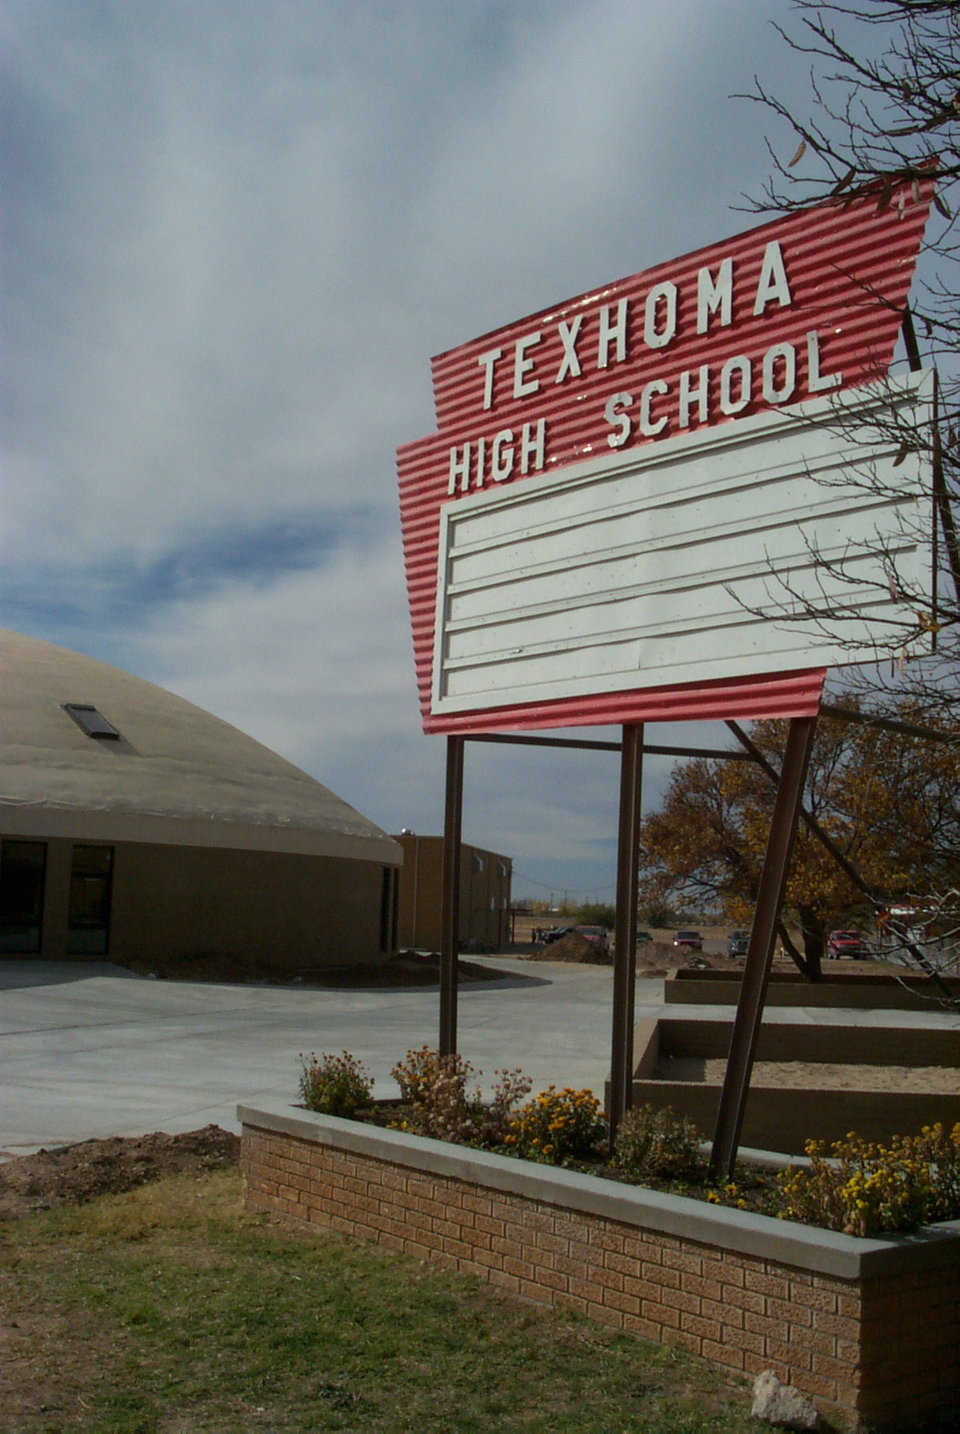 Texhoma School District — It serves approximately 500 students, in prekindergarten through grade 12, and now has a new Monolithic Dome facility for students in grades 5 through 12.